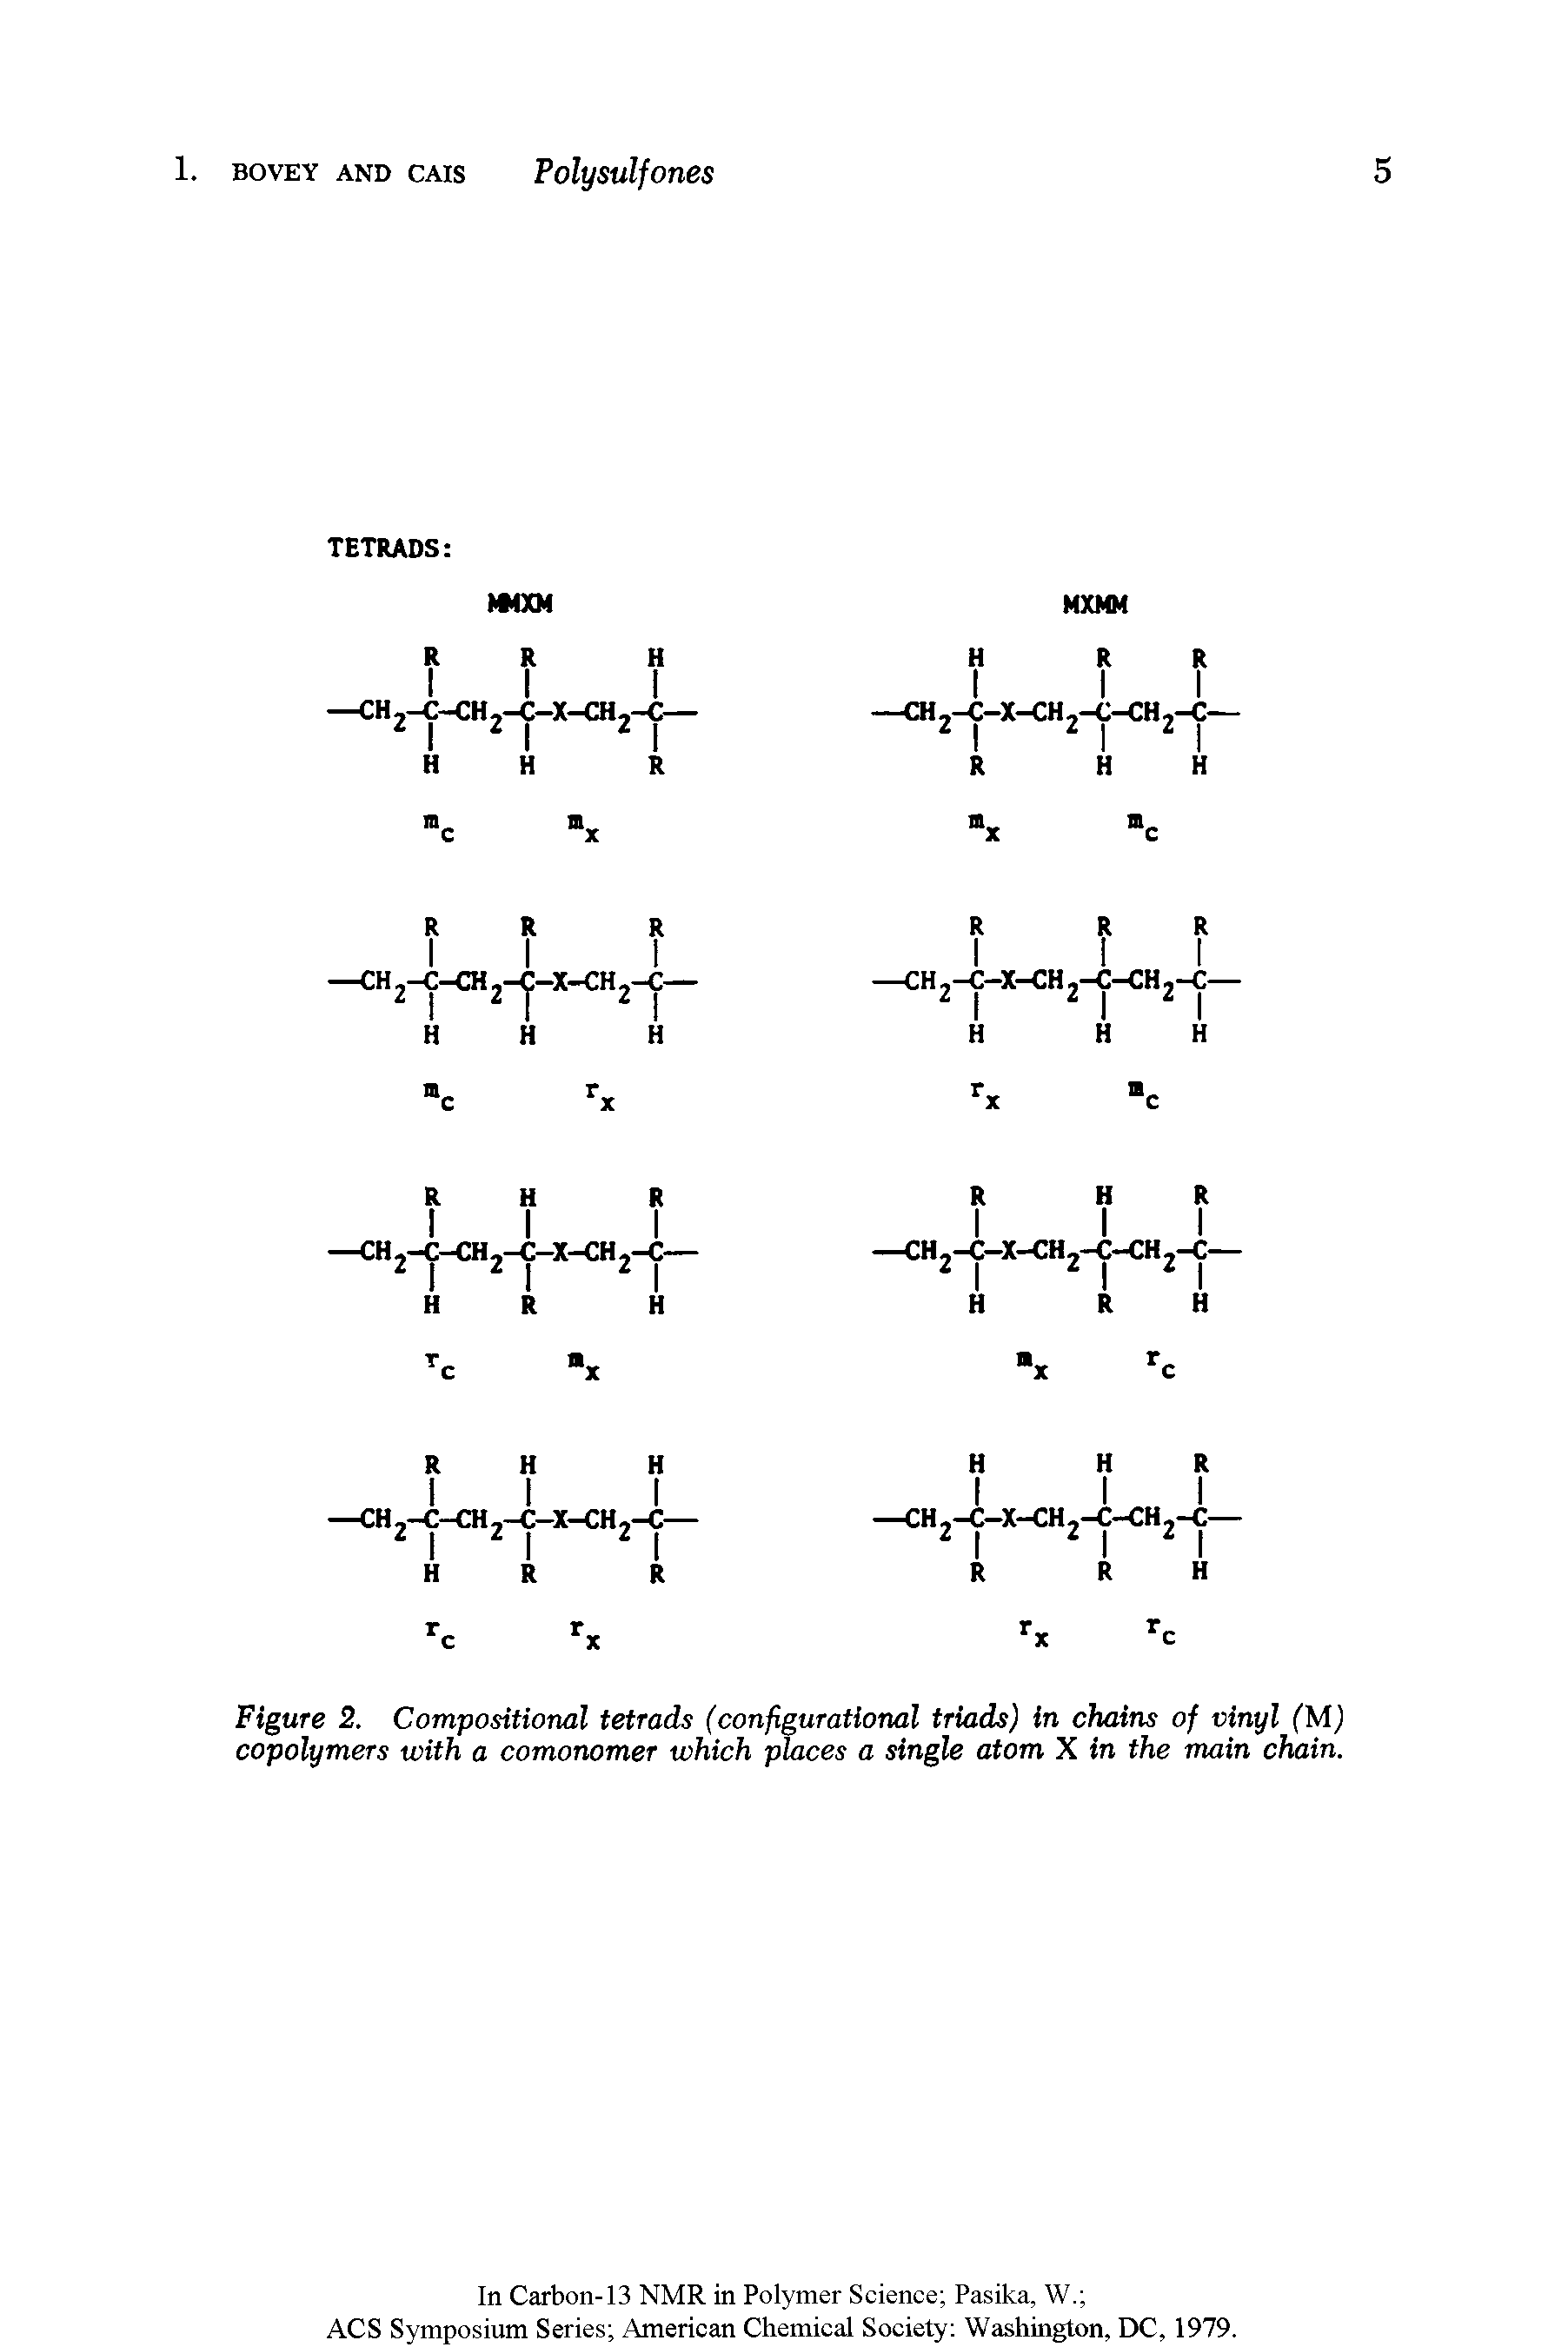 Figure 2. Compositional tetrads (configurational triads) in chains of vinyl (Mj copolymers with a comonomer which places a single atom X in the main chain.